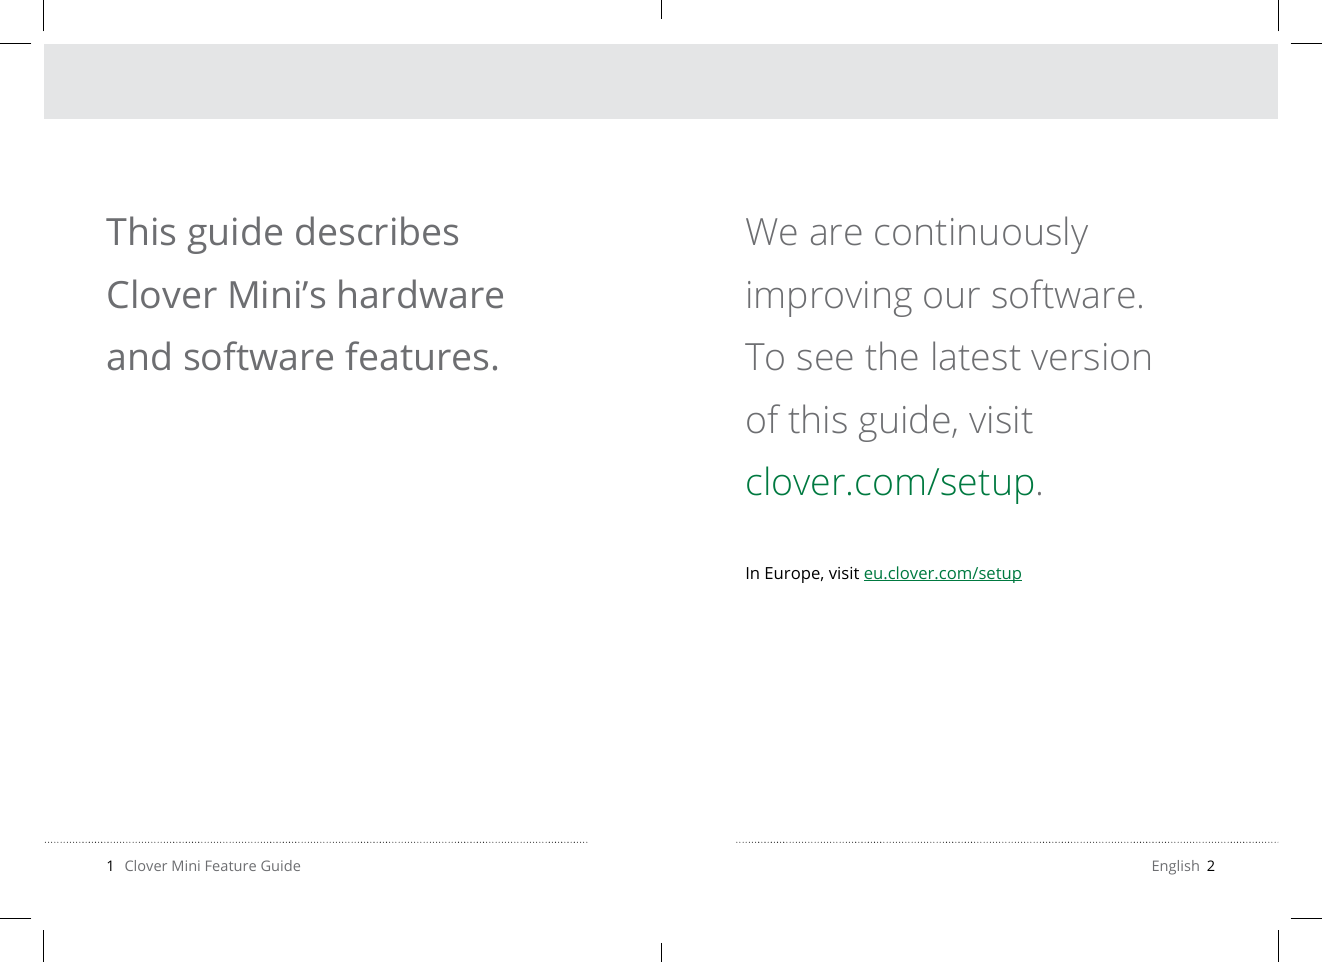 1   Clover Mini Feature Guide English  2We are continuously  improving our software. To see the latest version of this guide, visit  clover.com/setup.In Europe, visit eu.clover.com/setupThis guide describes Clover Mini’s hardware and software features.